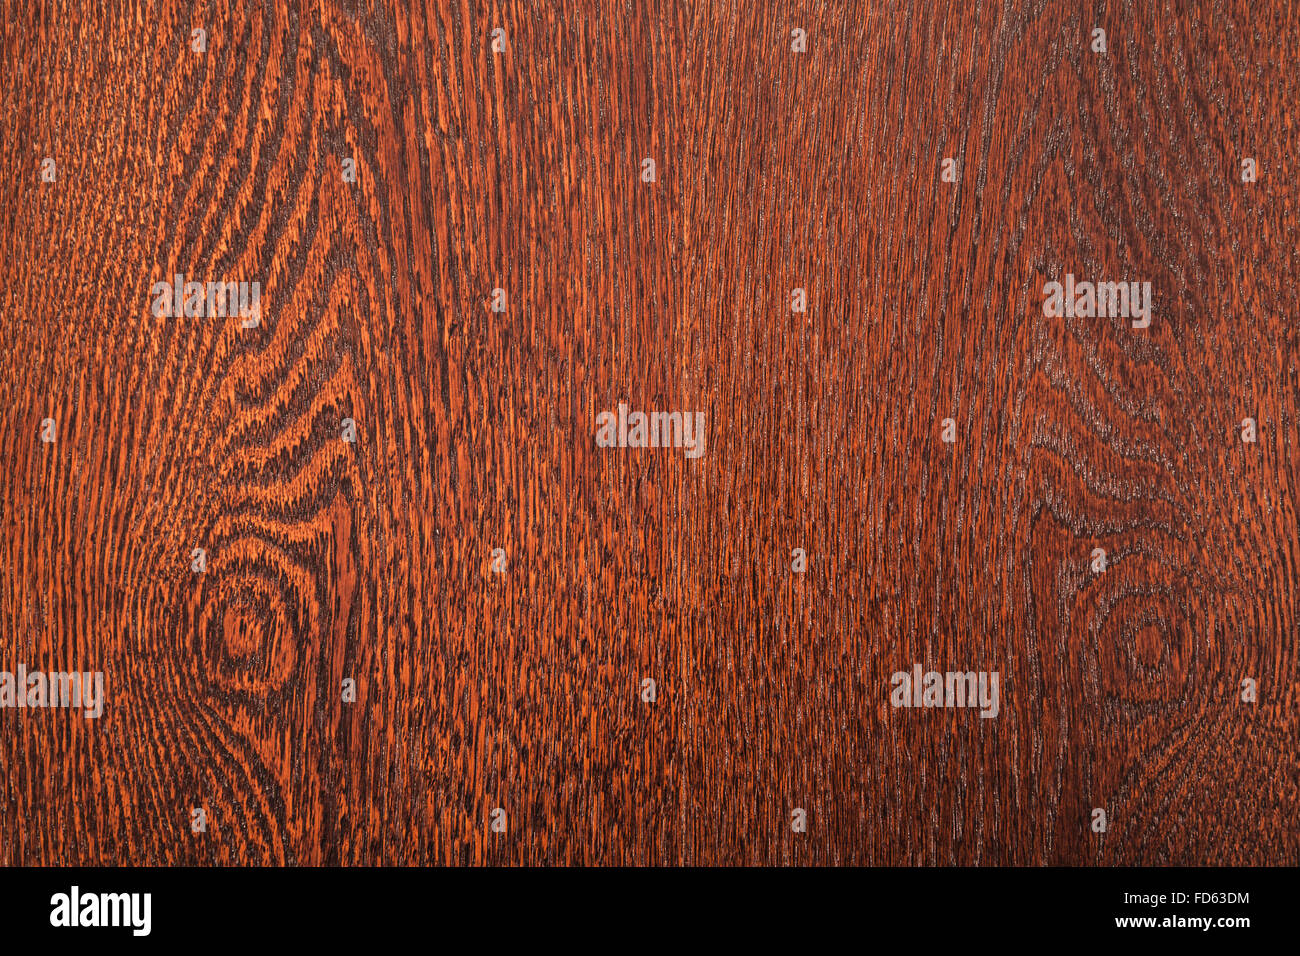 Background texture of dark red wooden veneer sheet with knots and natural pattern lines Stock Photo